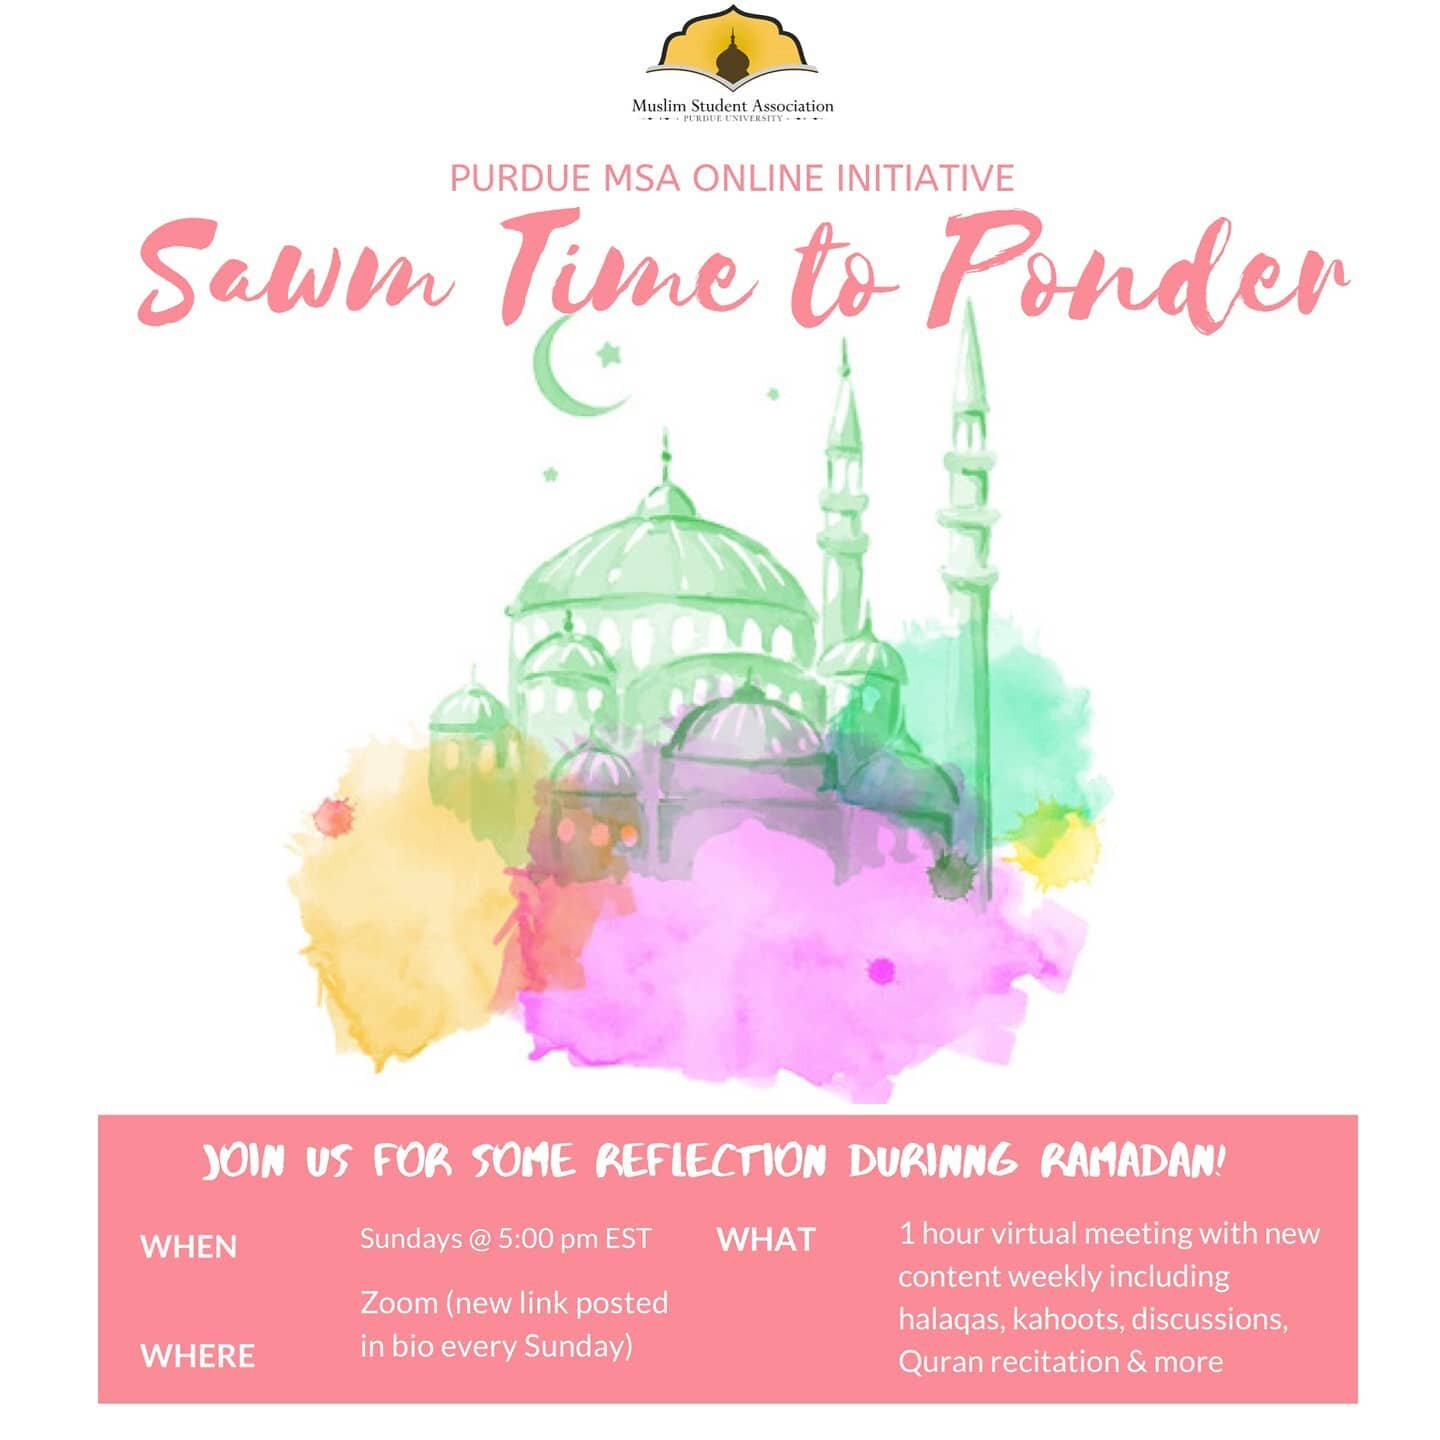 ASAK everyone! We hope you are all doing well. In the midst of these unfortunate circumstances, Purdue MSA is starting an online initiative. Every Sunday at 5 pm EST we will host &quot;Sawm Time to Ponder&quot; #punintended -  a zoom activity planned